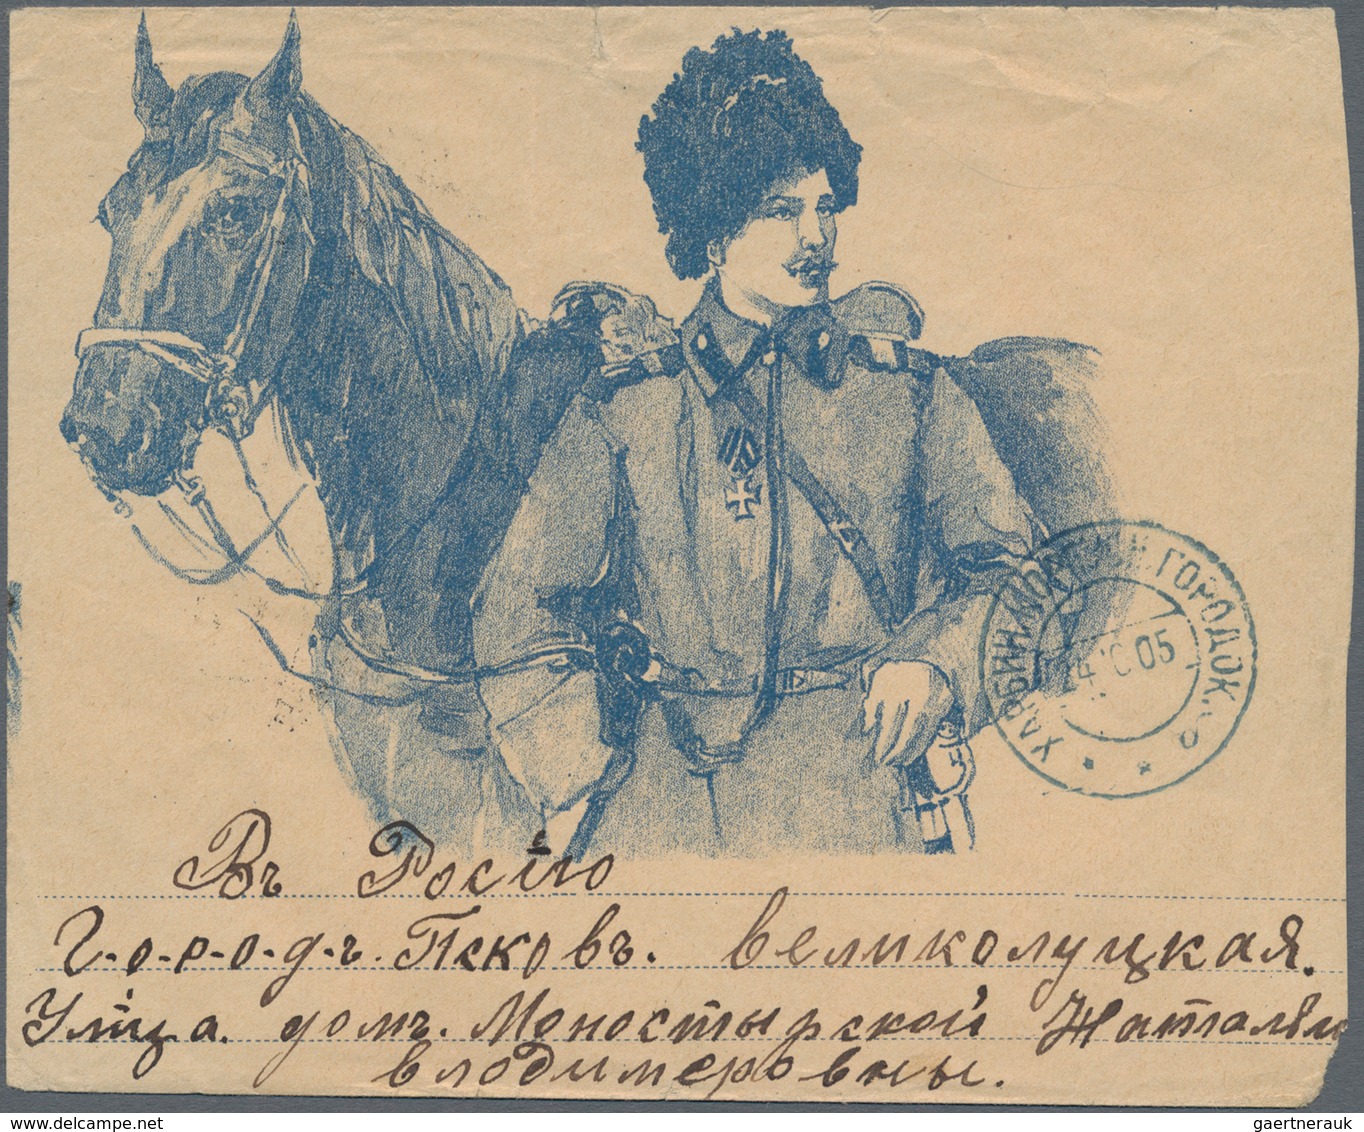 Russische Post In China: 24.10.1905 Russo-Japanese War Pictorial Envelope With Cossack Motif From Kh - China